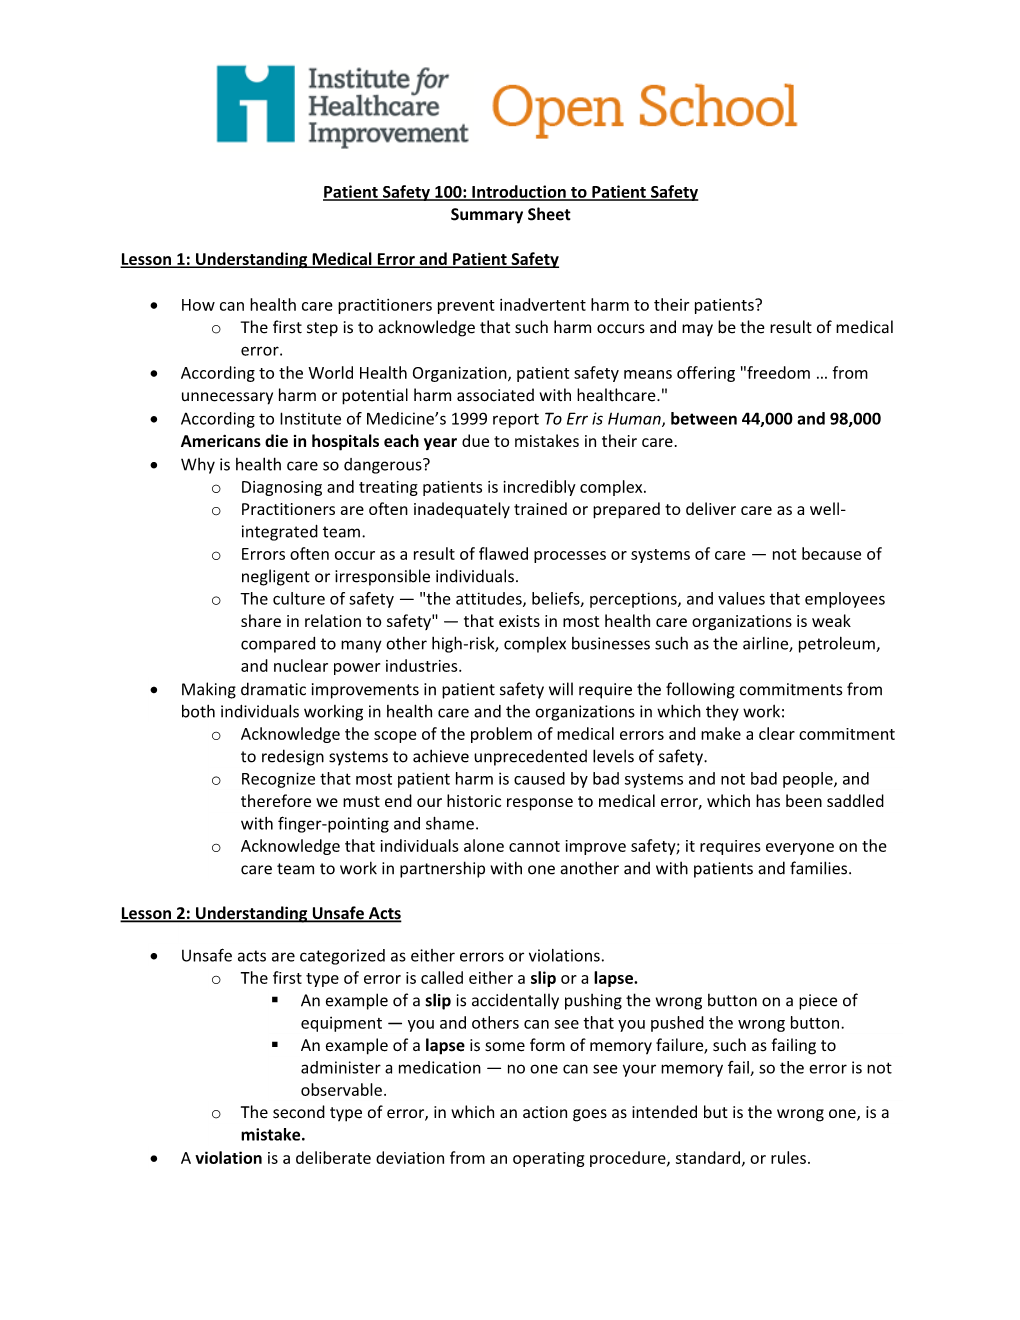 Patient Safety 100: Introduction to Patient Safety Summary Sheet